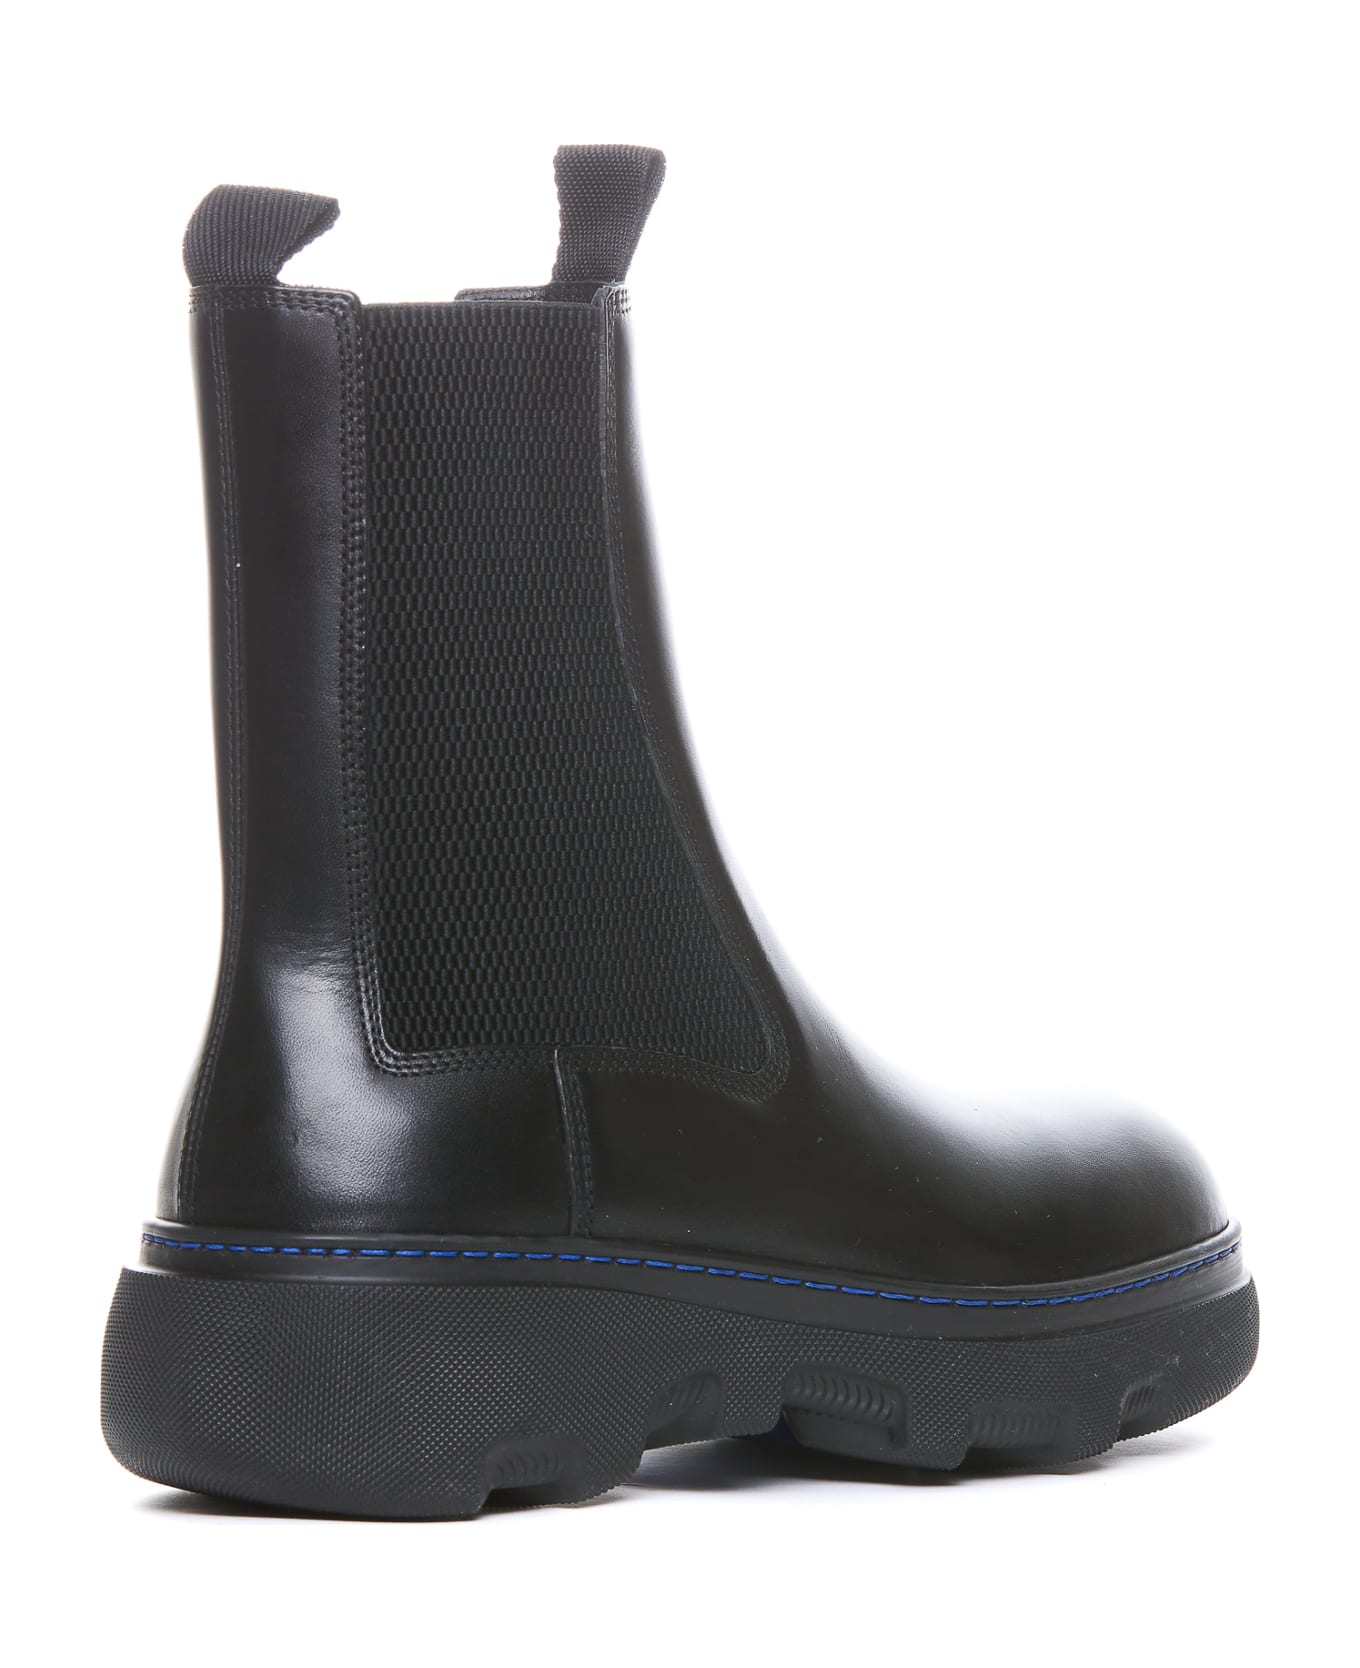 Burberry Leather Ankle Boots - Black ブーツ